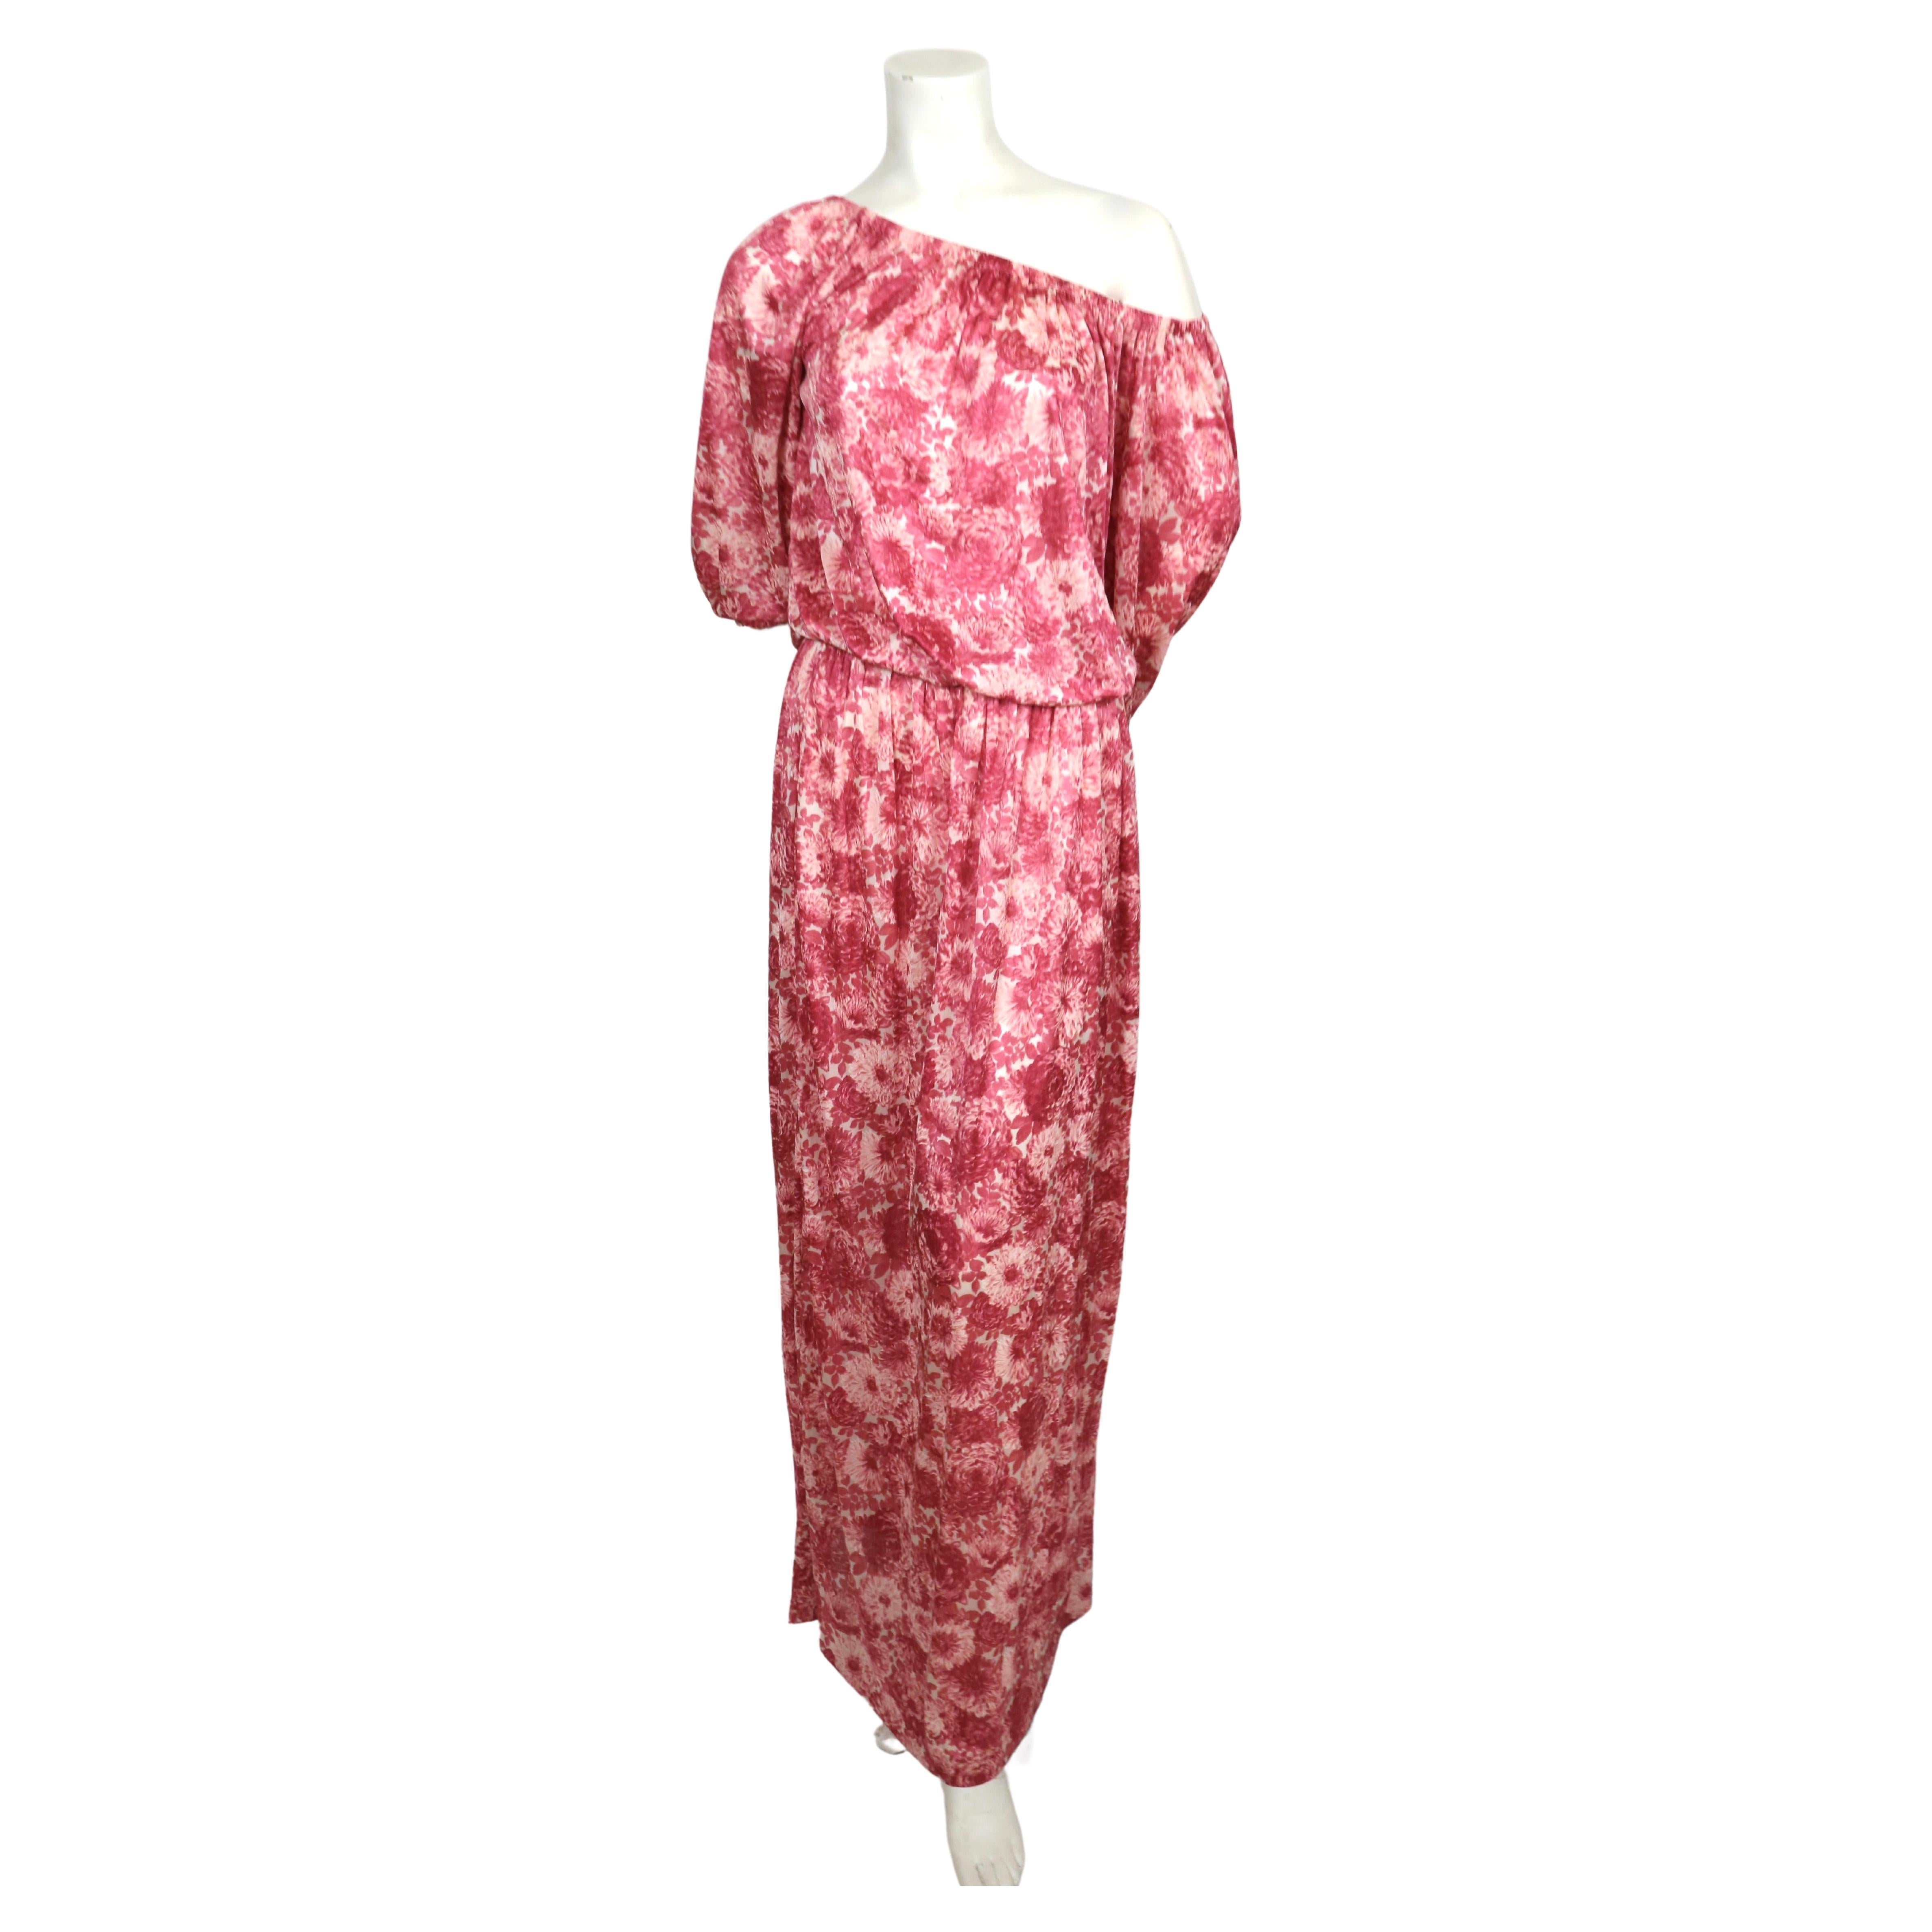 Rose, floral-printed silk jersey dress with elasticized neckline and waist designed by Yves Saint Laurent dating to the 1970's. Labeled a French size 34 however this will easily fit up to a French 38. Dress can be worn on or off the shoulders due to